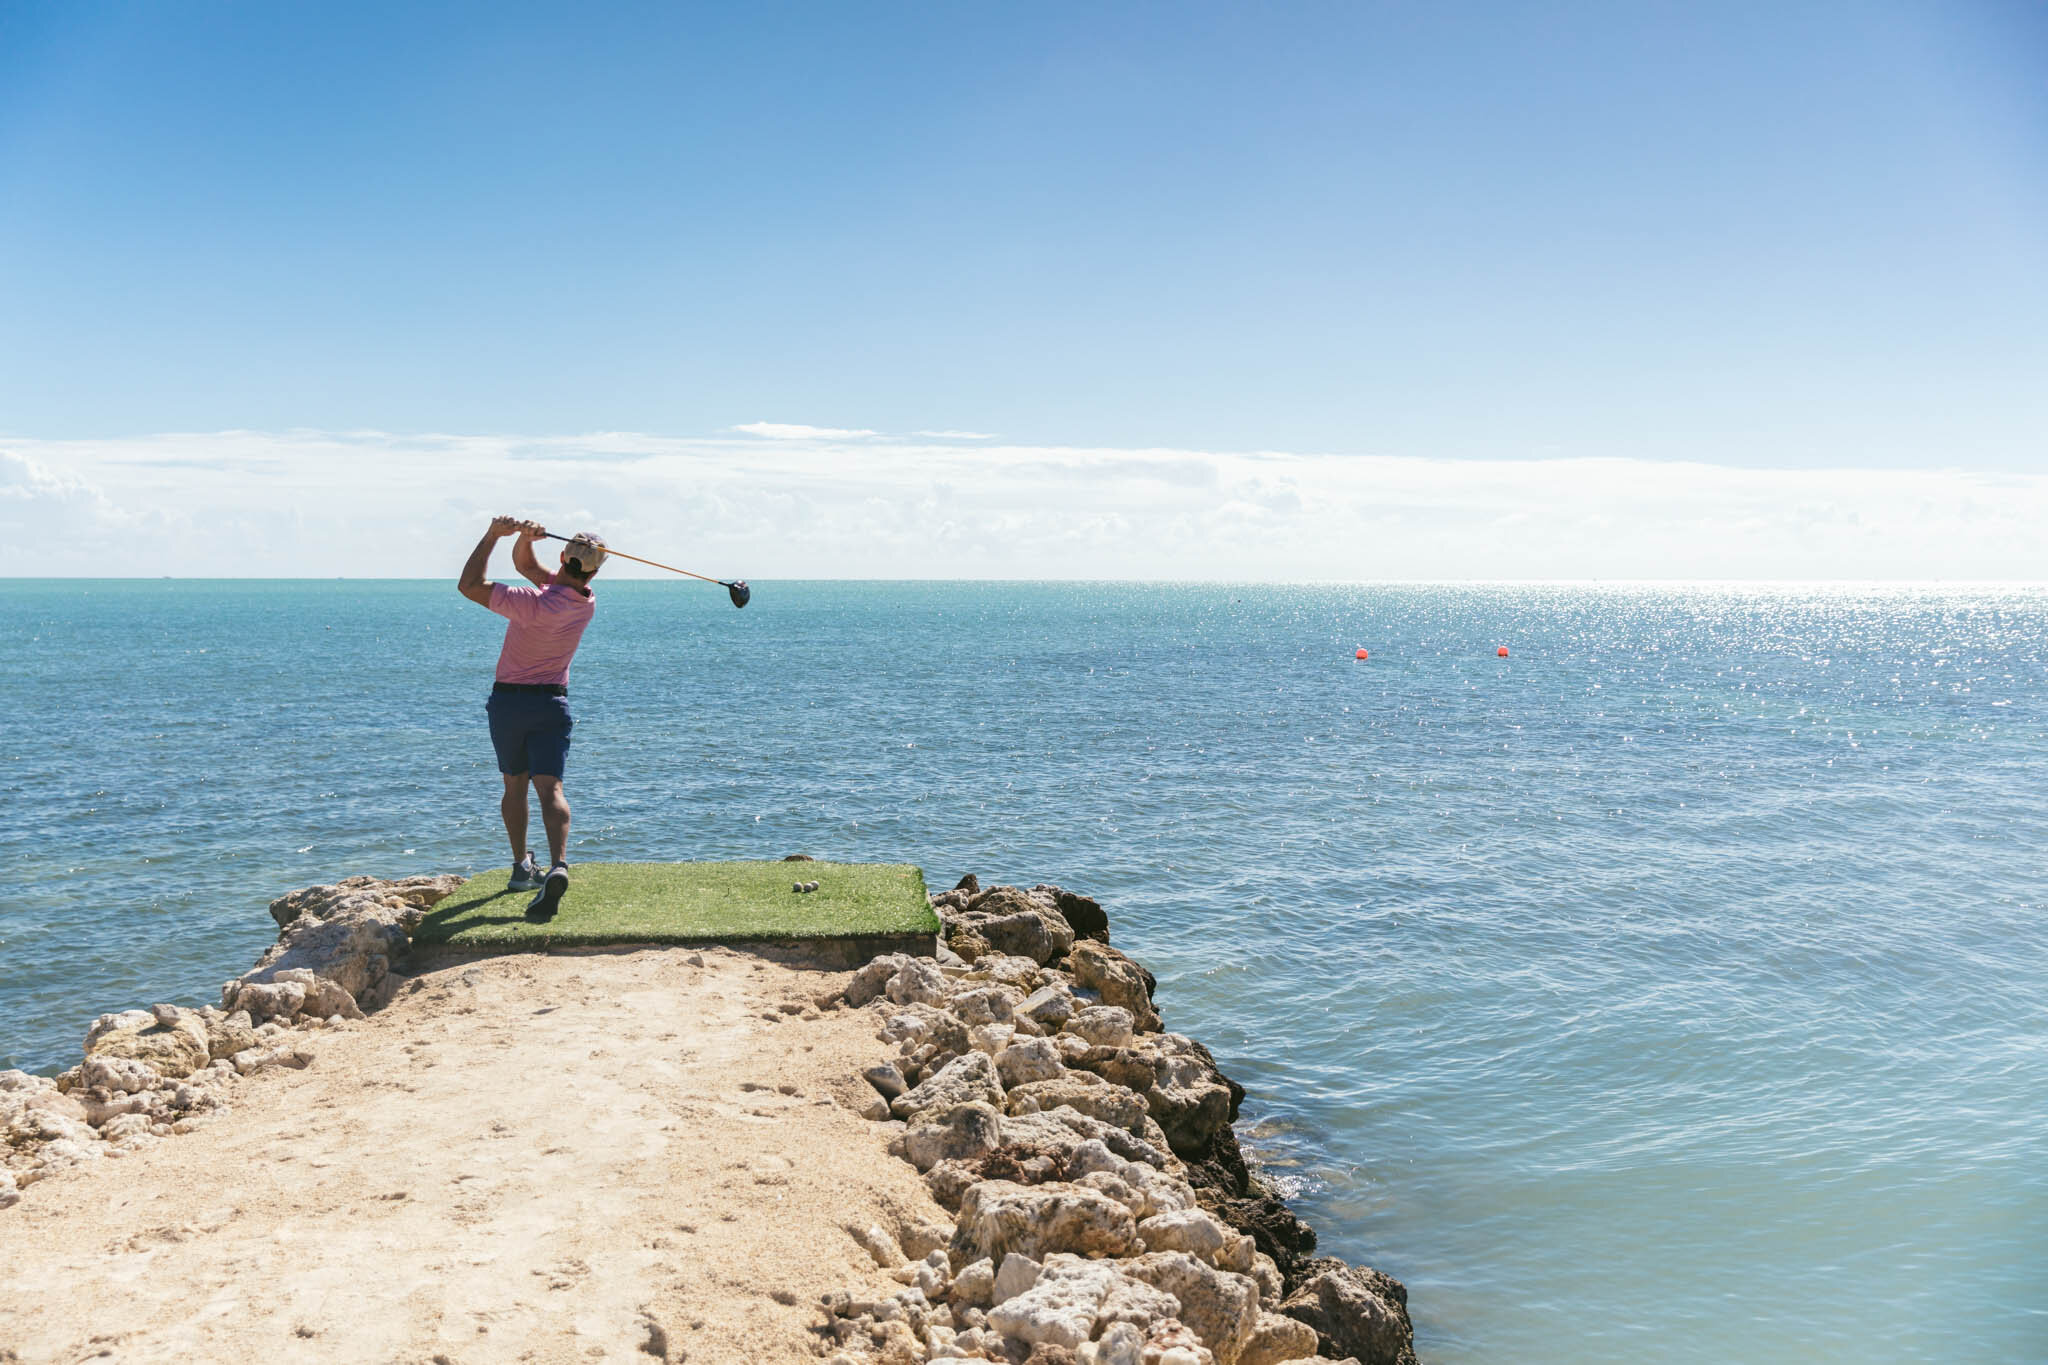  Man Swinging A Golf Club As He Hits A Ball From The Islands Of Islamorada’s Private Jetty Into The Crystal Clear Waters Of The Atlantic Ocean Off The Coast Of Florida. 